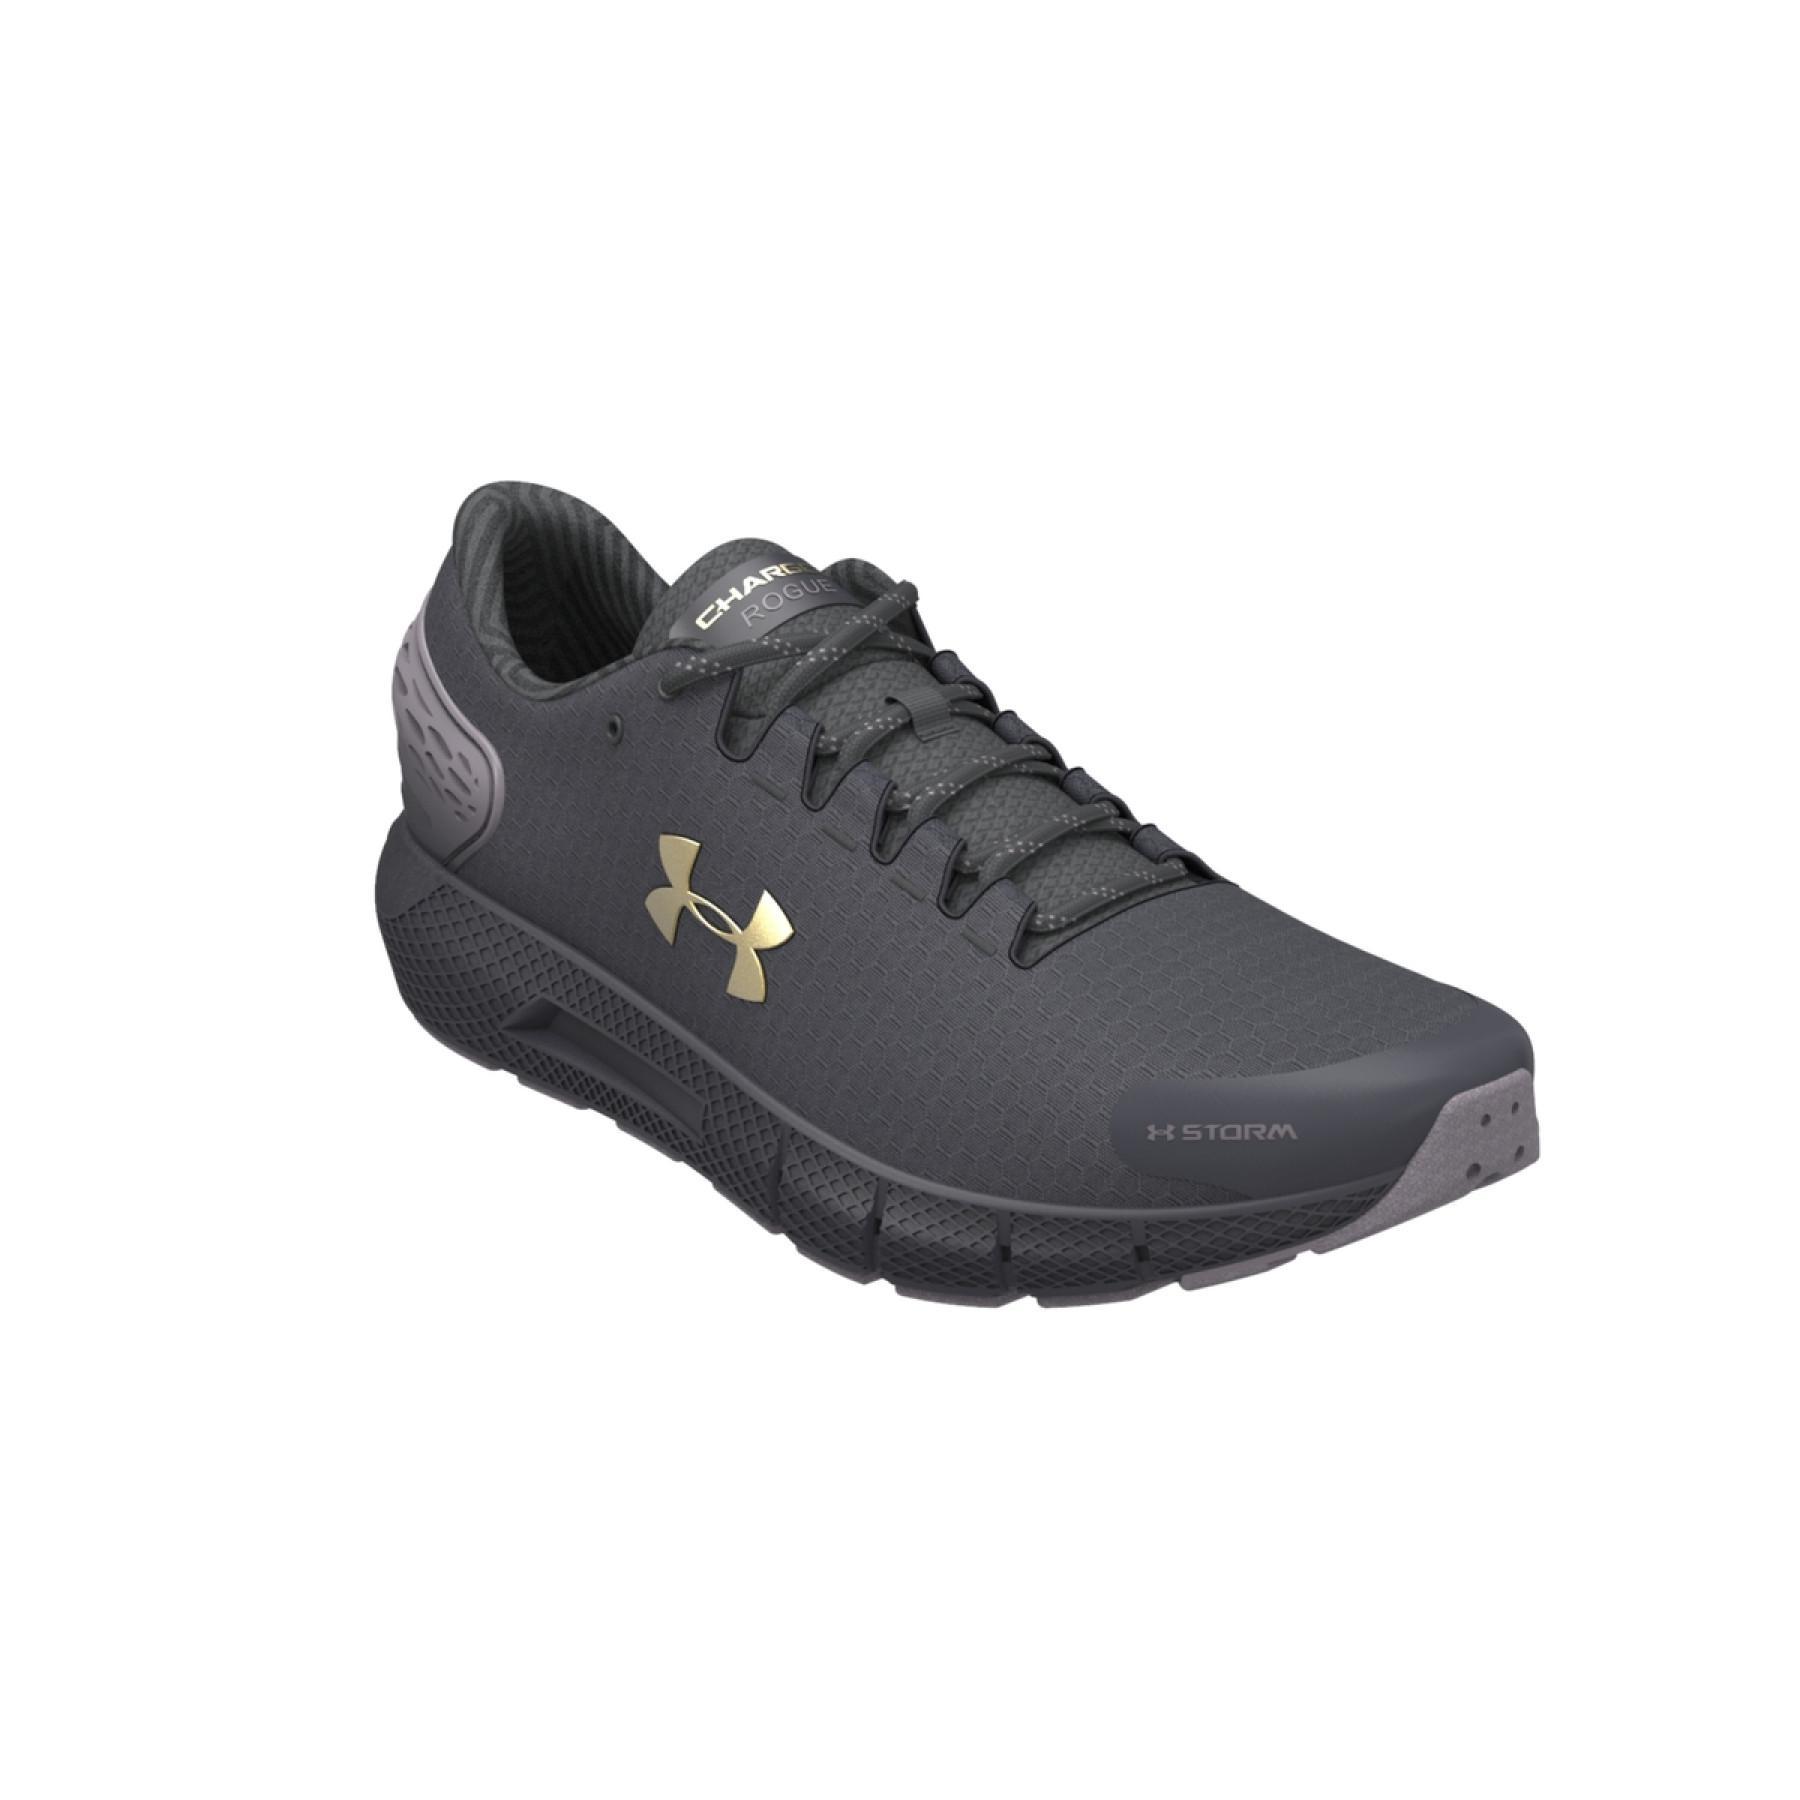 Buty do biegania Under Armour Charged Rogue 2 ColdGear Infrared